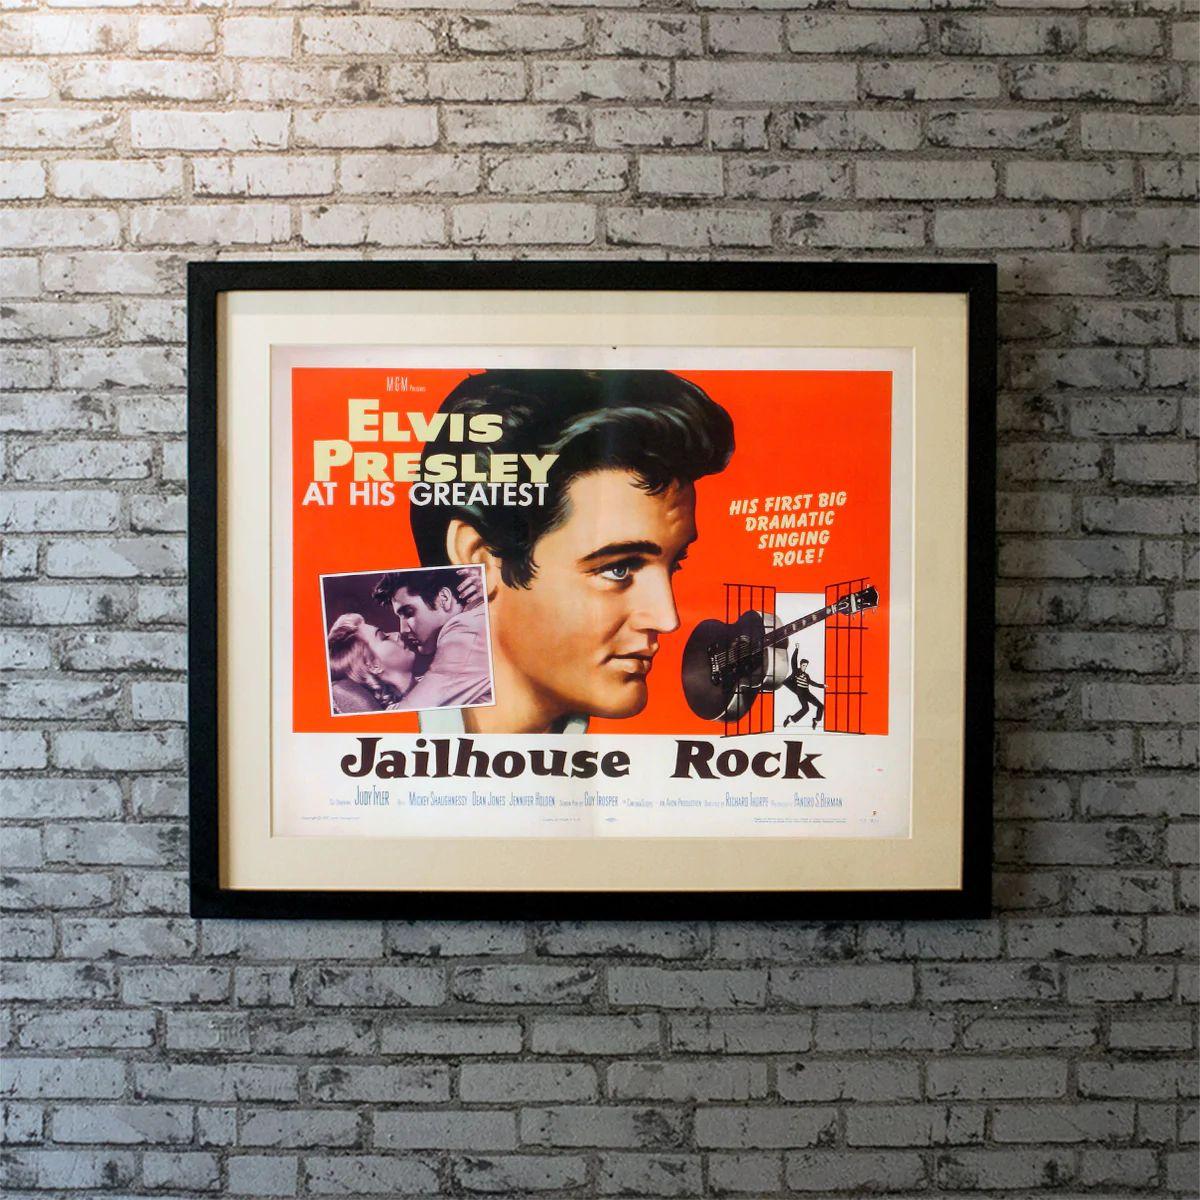 Jailhouse Rock, Unframed Poster, 1957

US Half Sheets (22 X 28 Inches). A secret agent comes to an opium lord's island fortress with other fighters for a martial-arts tournament.

Year: 1973
Nationality: US Half Sheets
Condition: